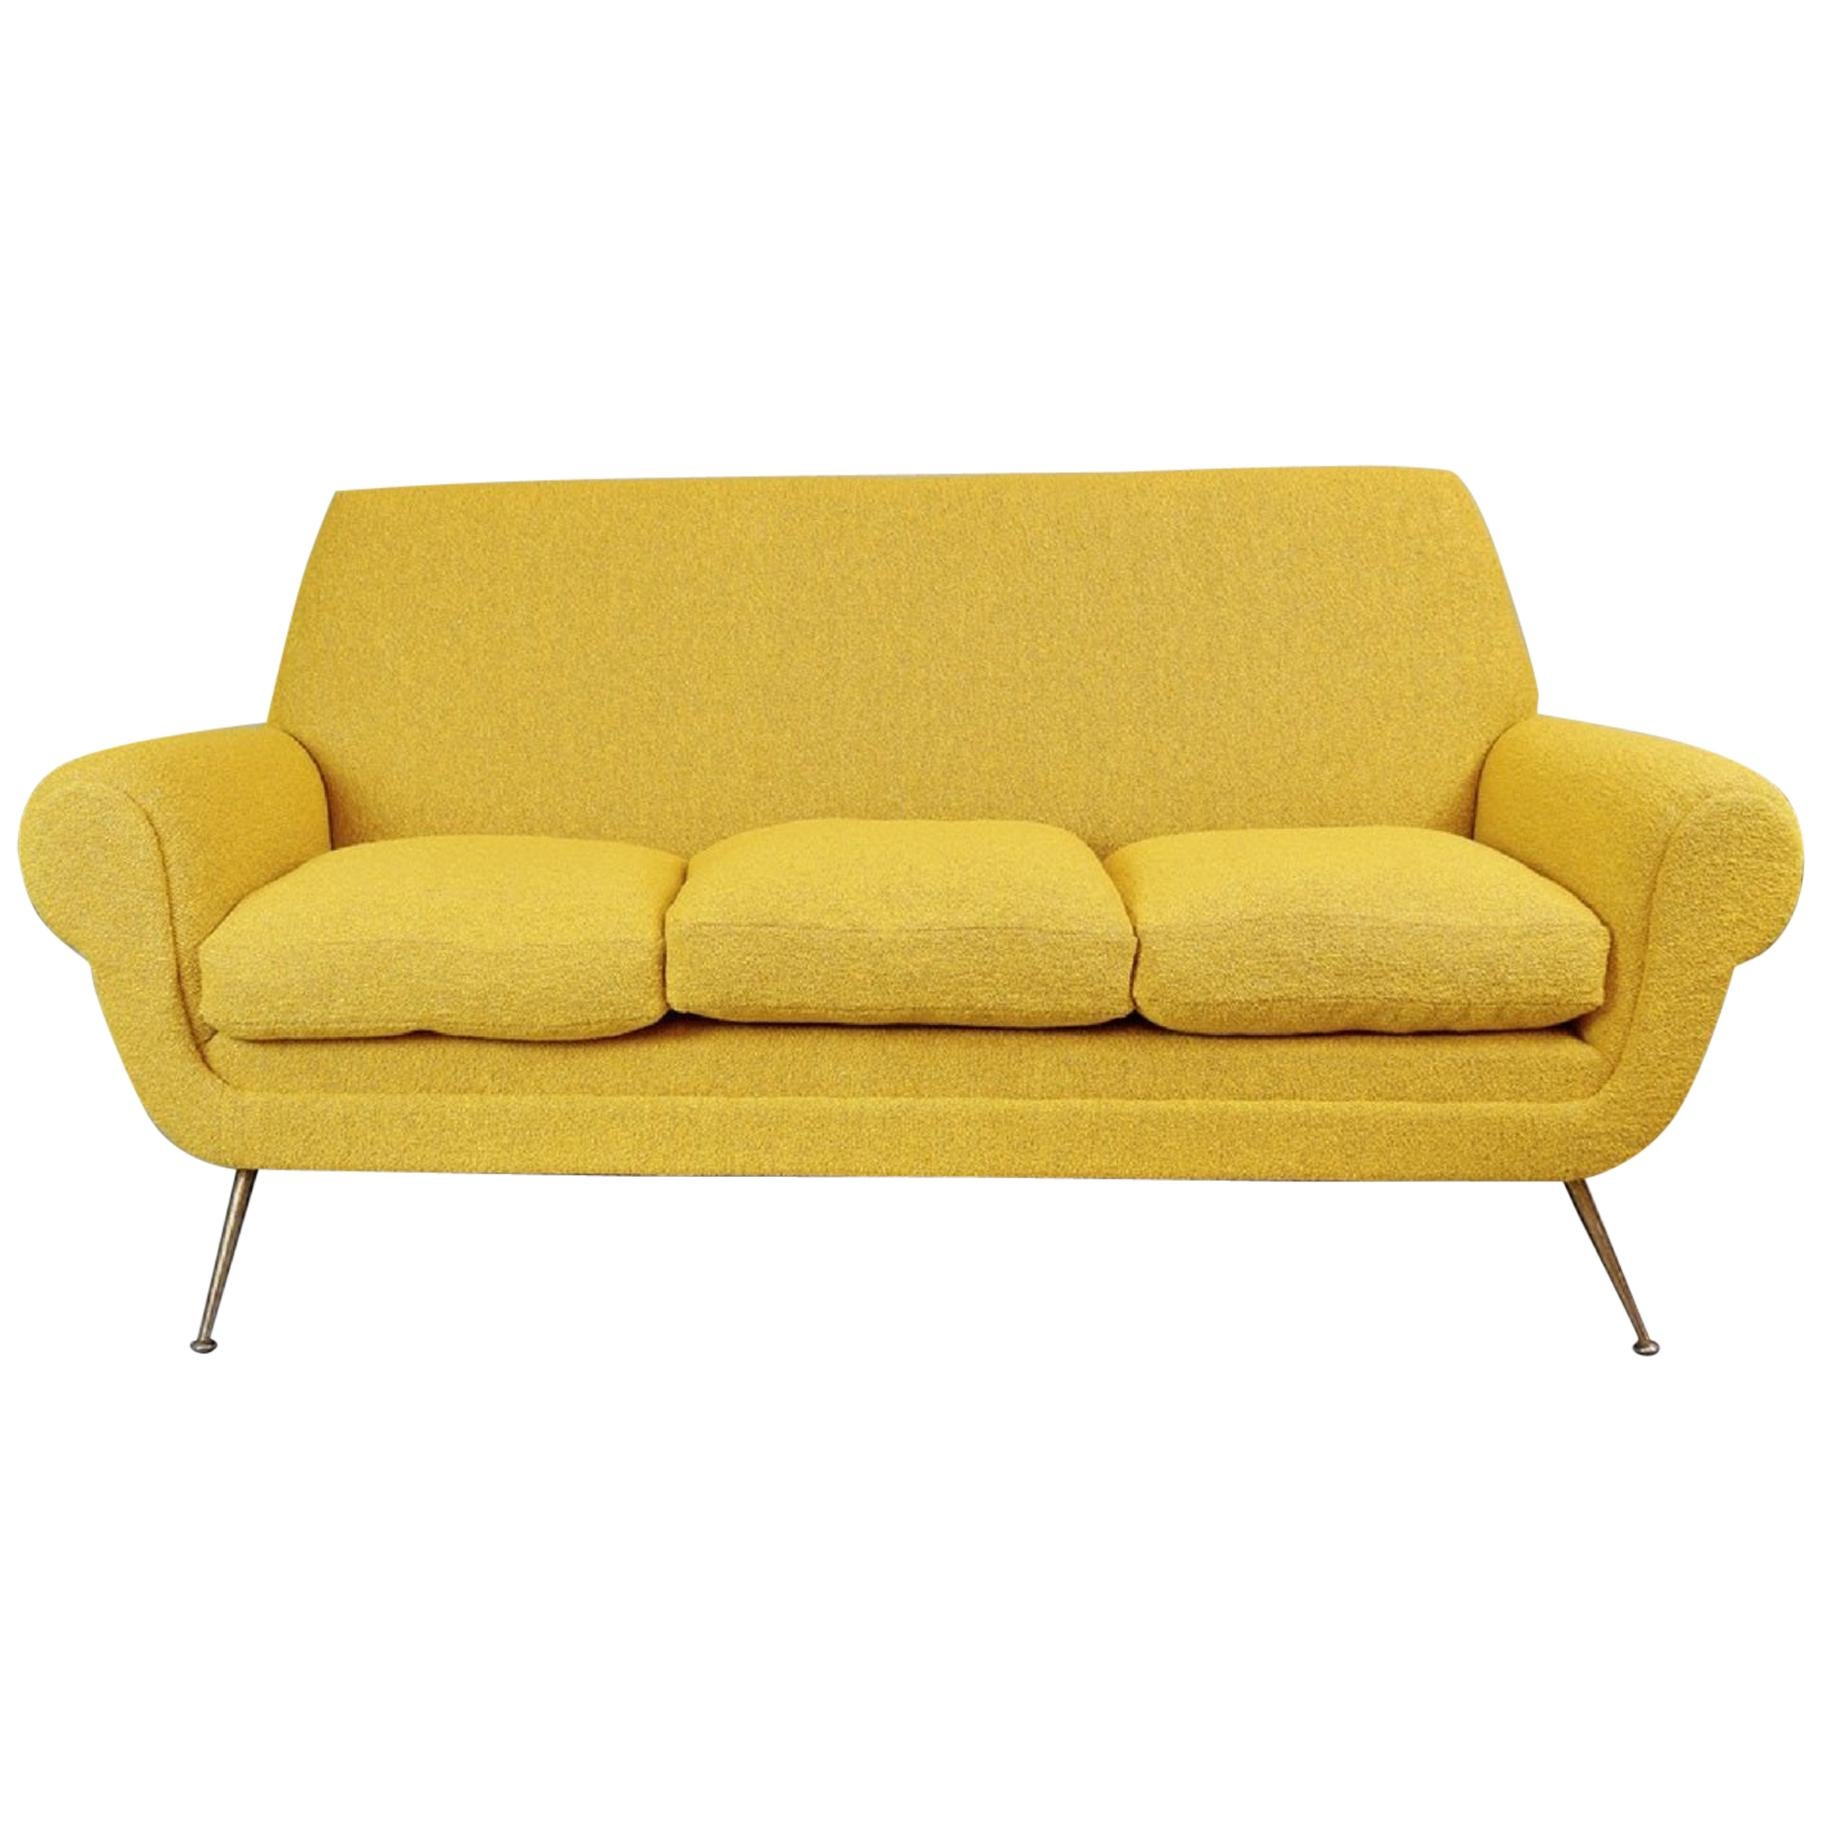 Gigi Radice for Minotti 3-Seat Sofa, 1950s, Curry Color New Upholstery